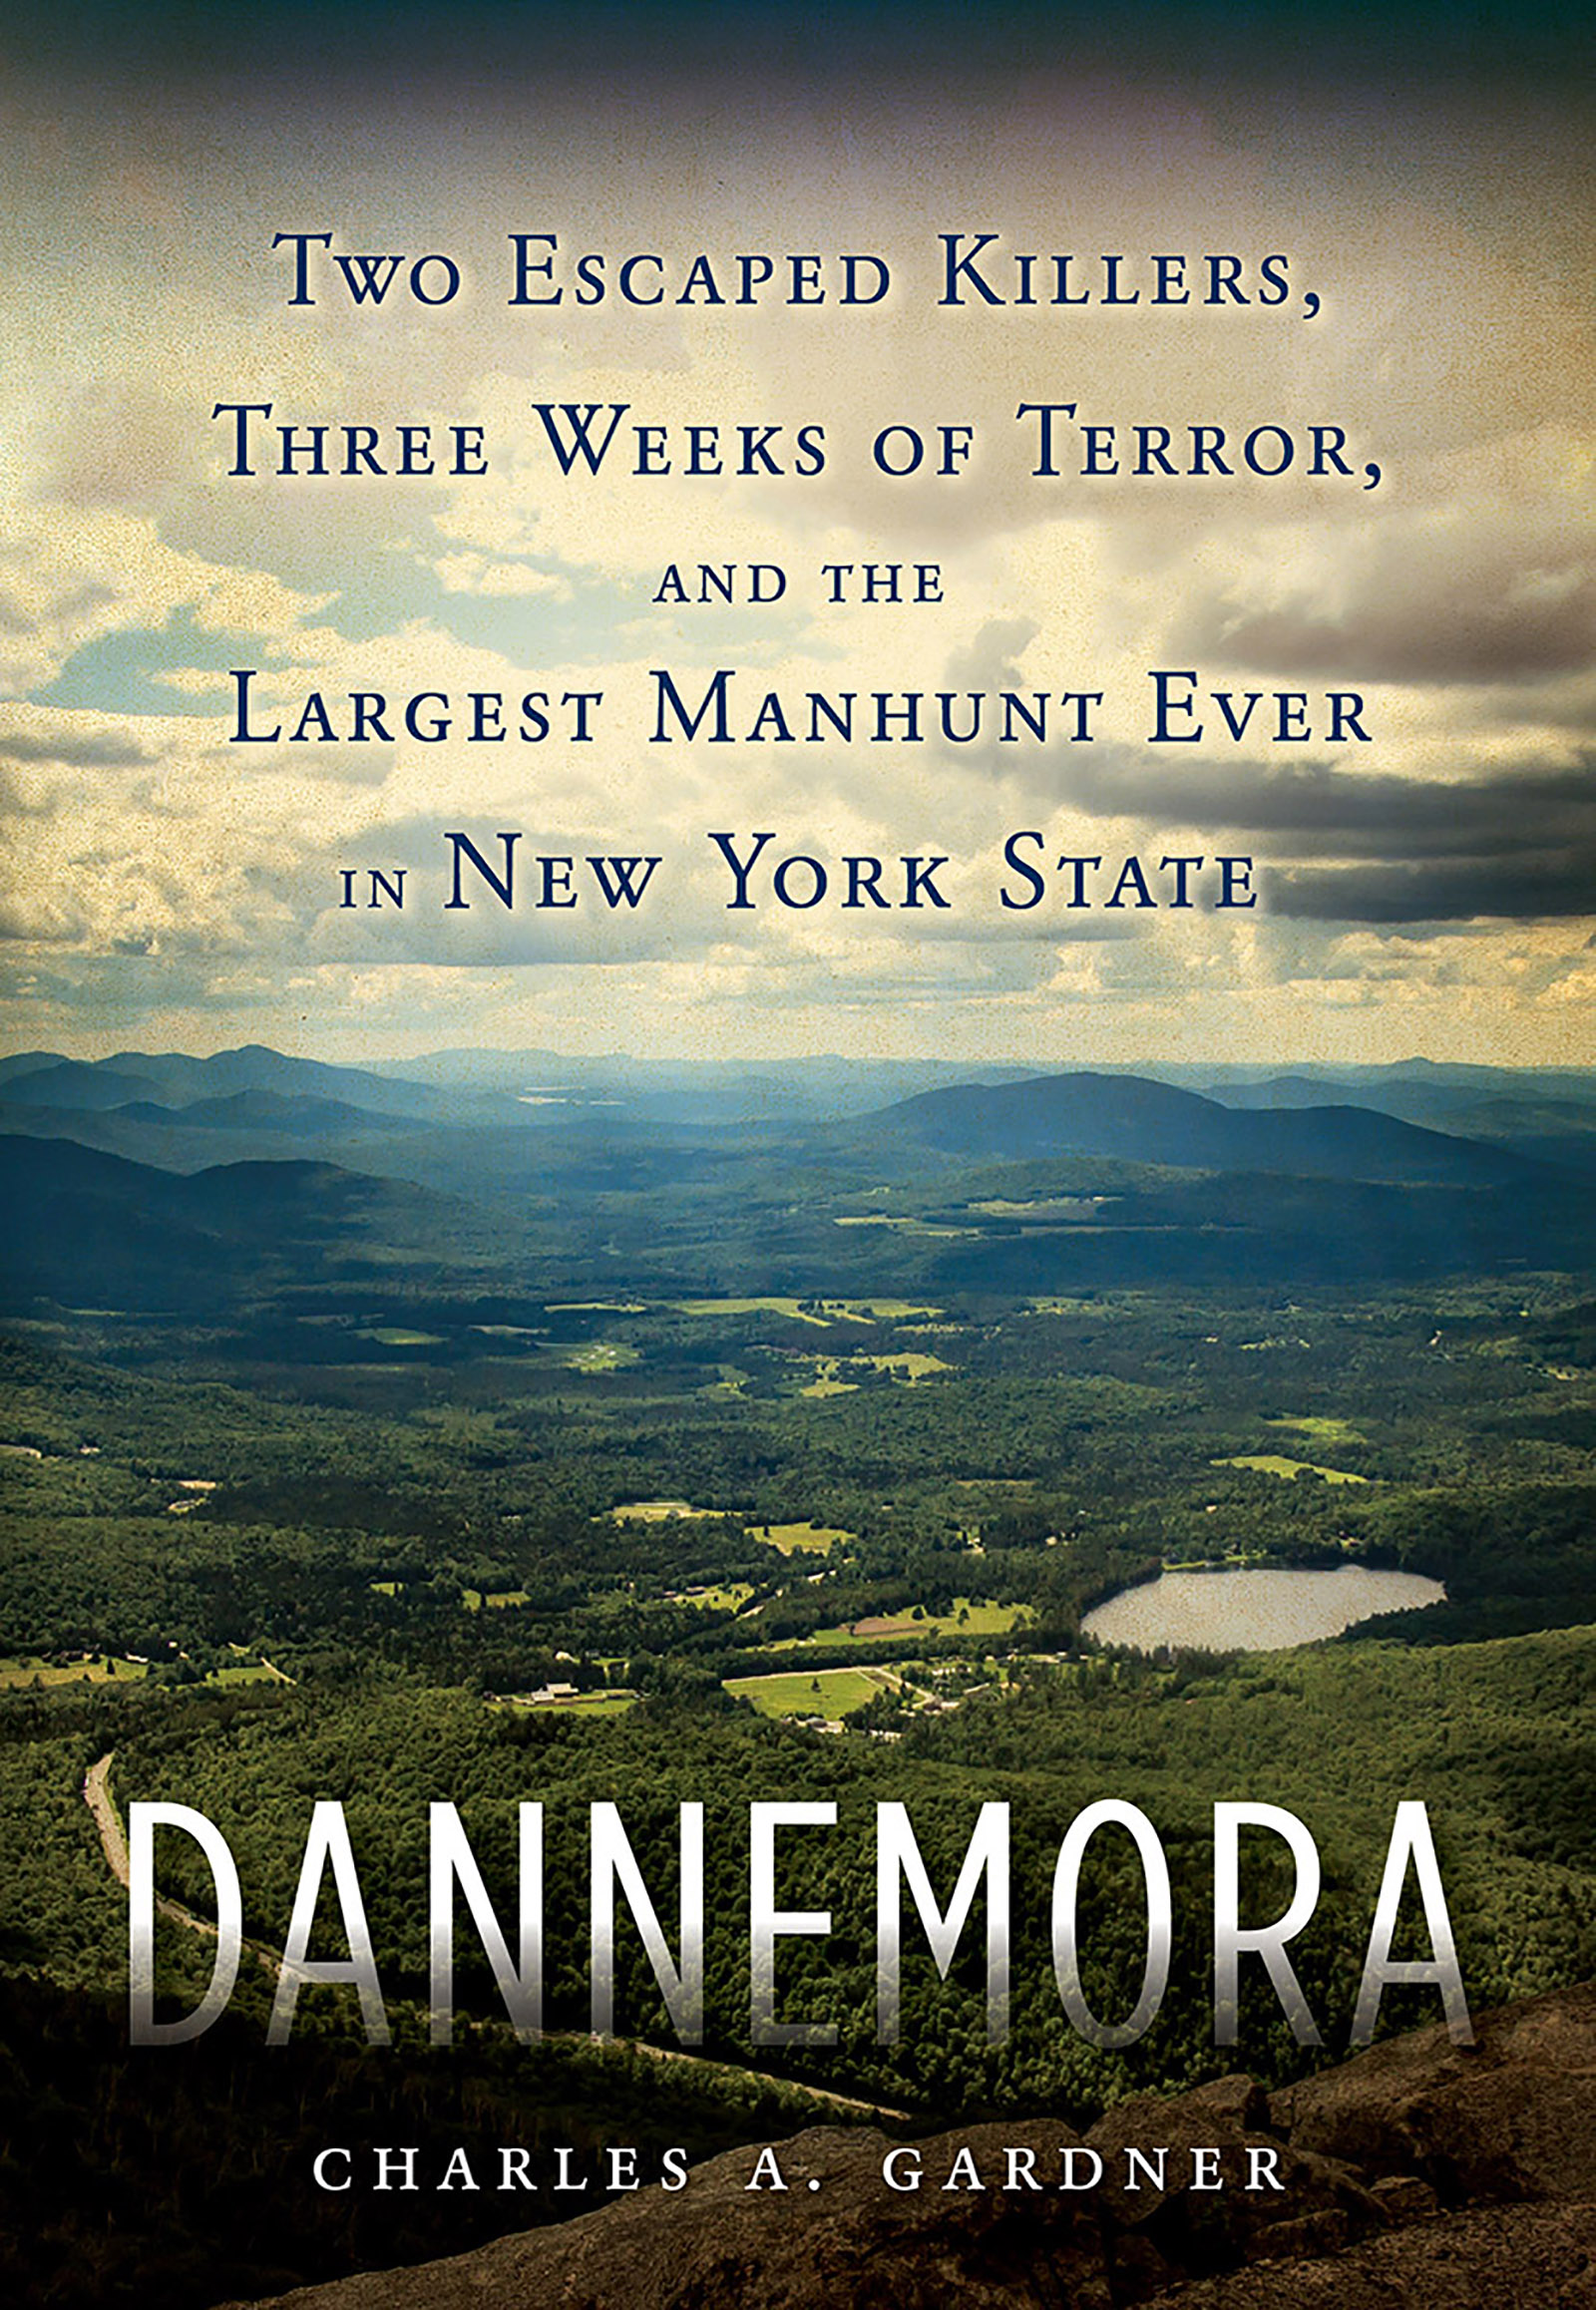 Cover image for Dannemora [electronic resource] : Two Escaped Killers, Three Weeks of Terror, and the Largest Manhunt Ever in New York State